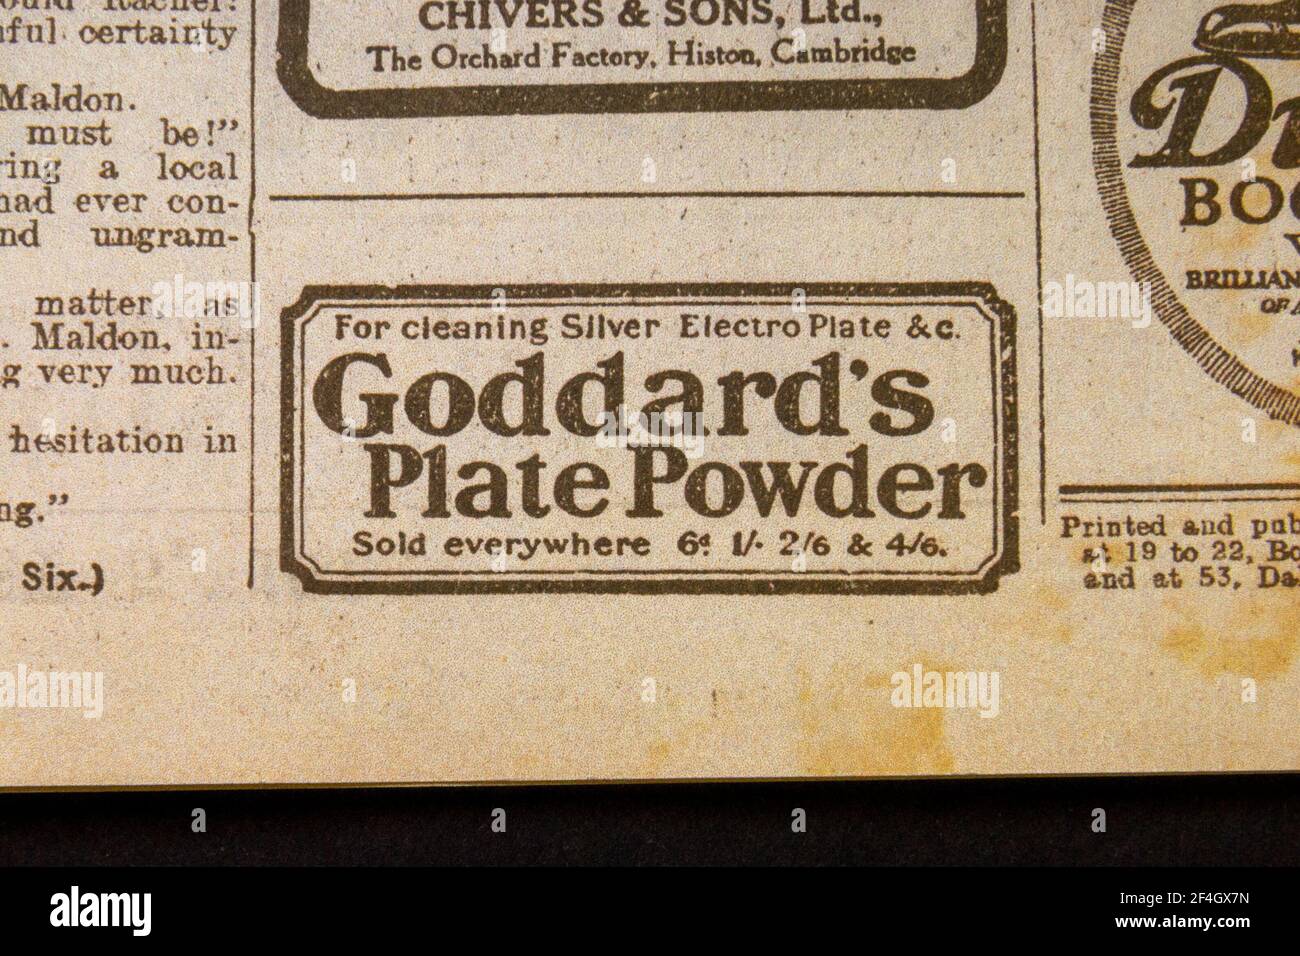 Advert for Goddard's Plate Powder in the Daily News & Reader newspaper on 5th Aug 1914. Stock Photo